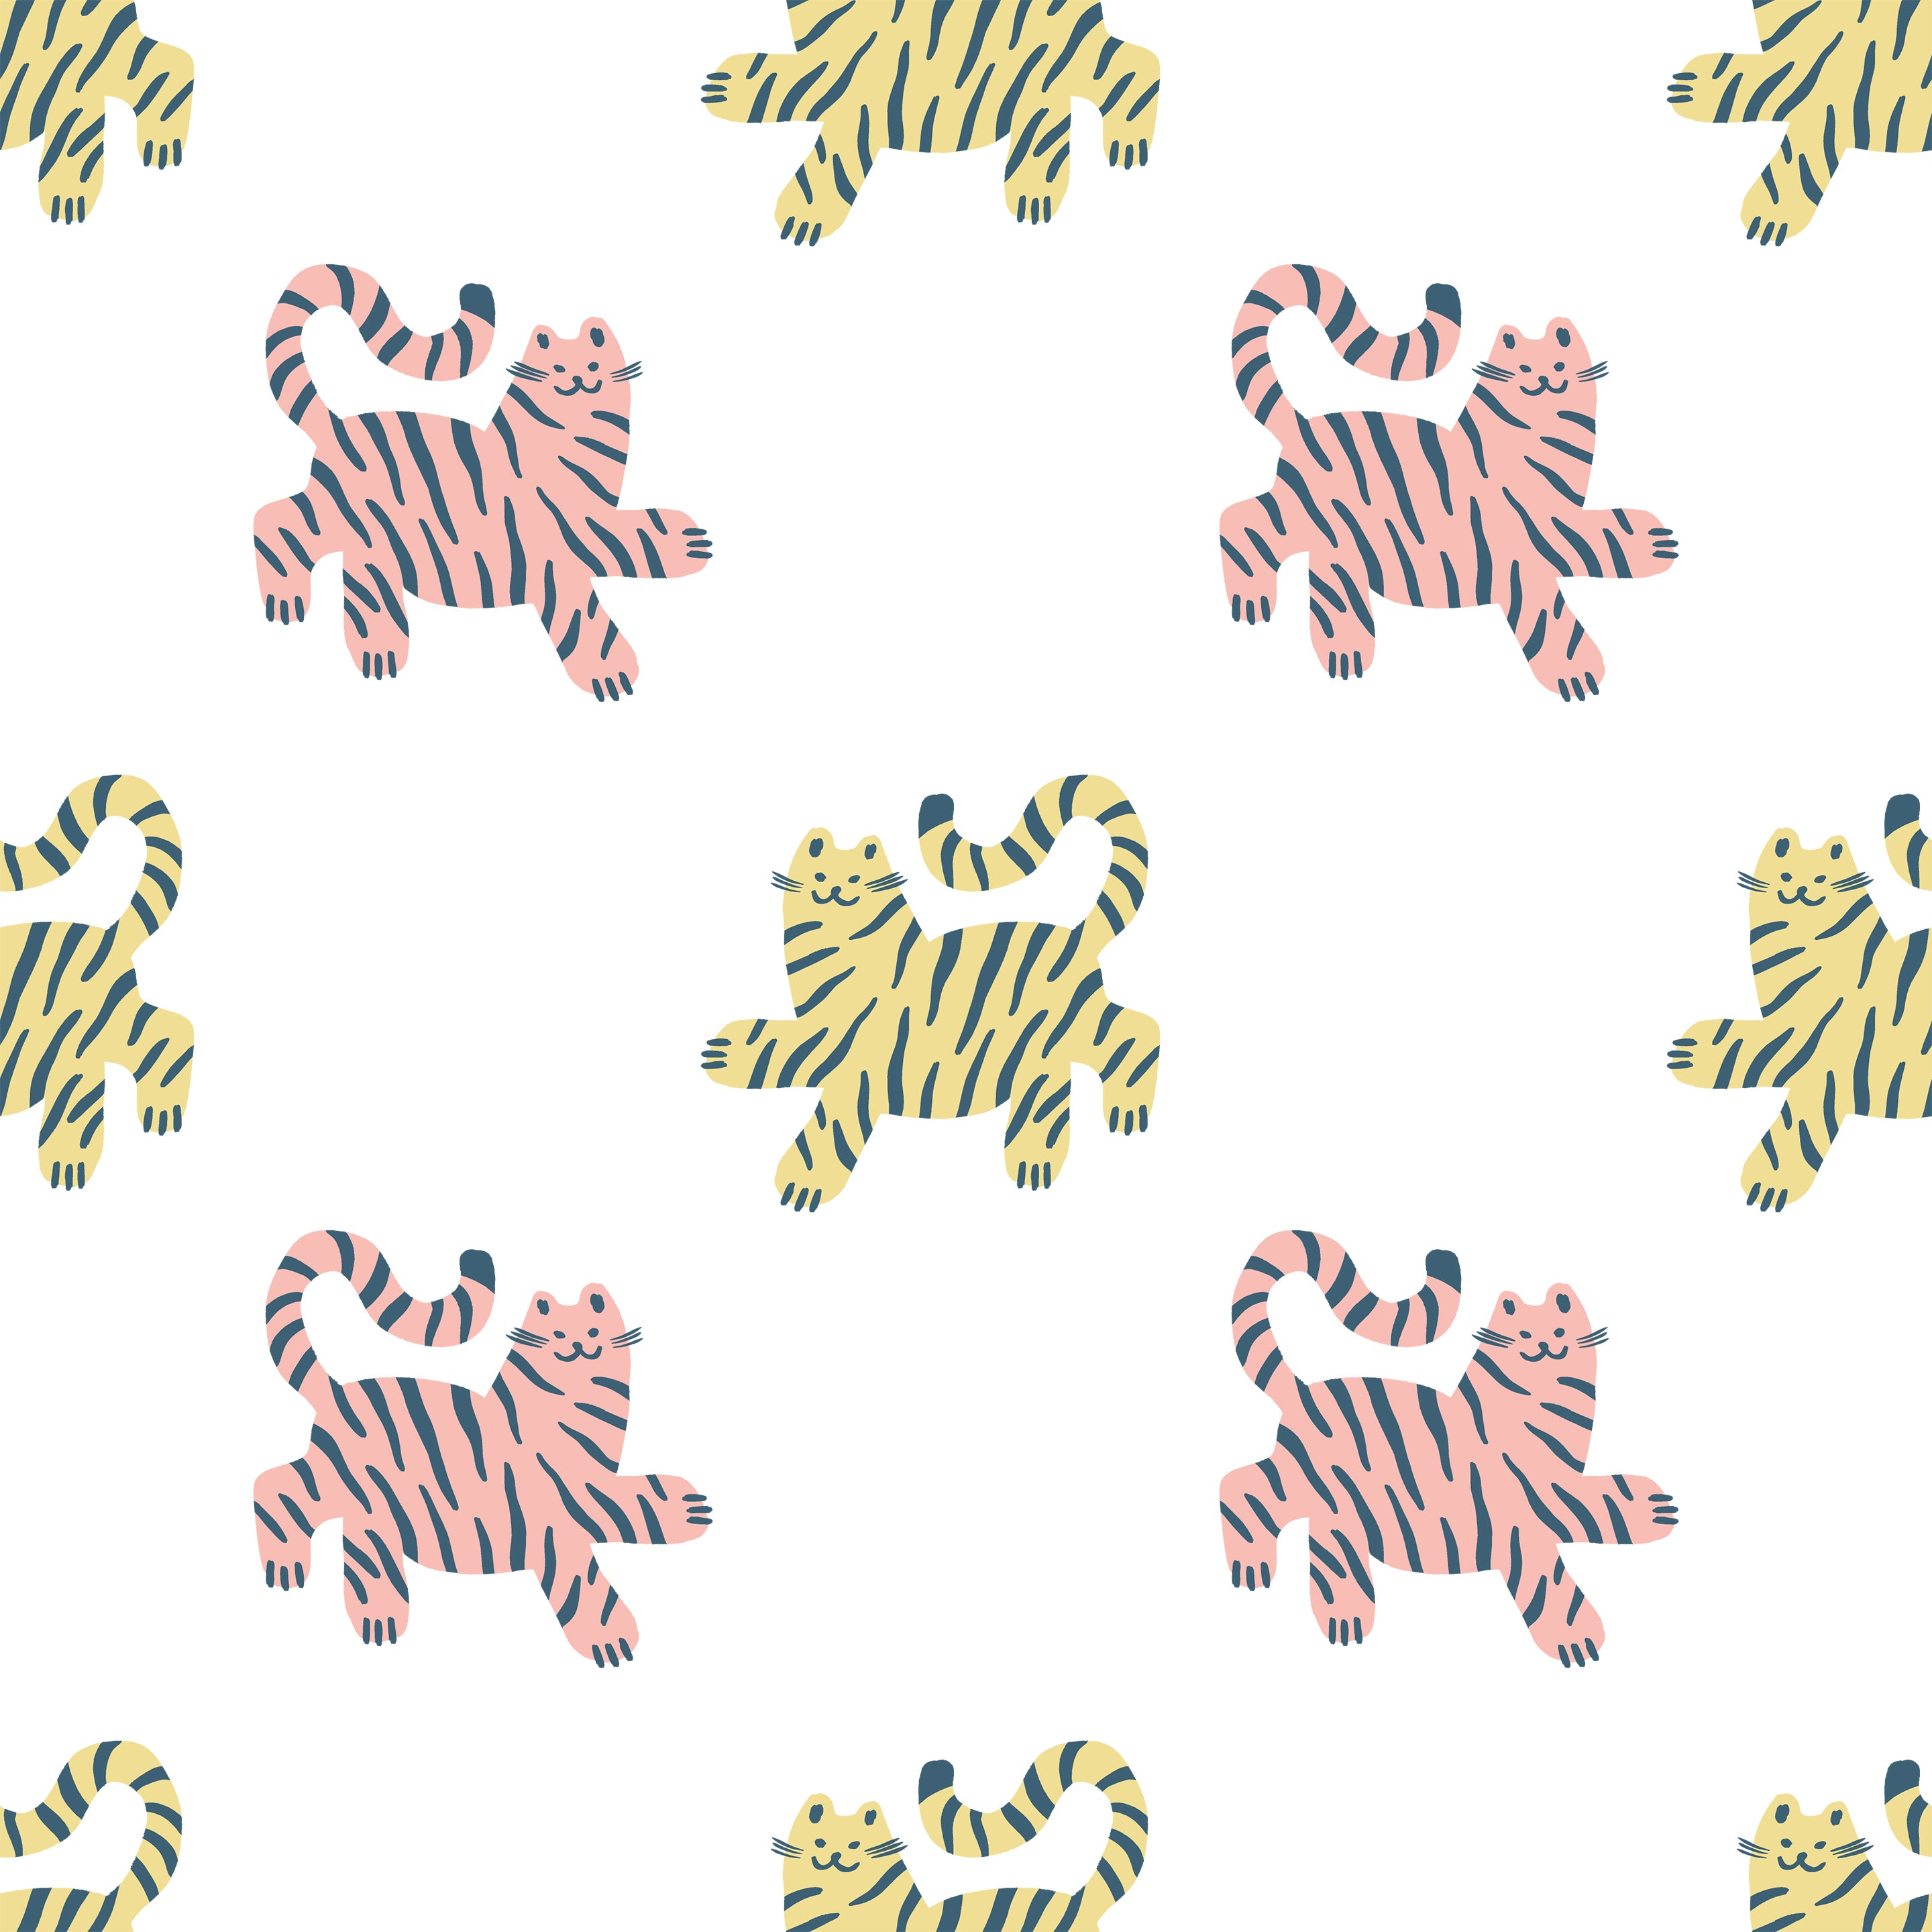 Vibrant and playful wallpaper pattern featuring pink and yellow striped cats in dynamic, leaping poses on a white background. 'Cat Wallpaper 3' is perfect for adding a lively and joyful touch to any room, especially suitable for children's areas or creative spaces